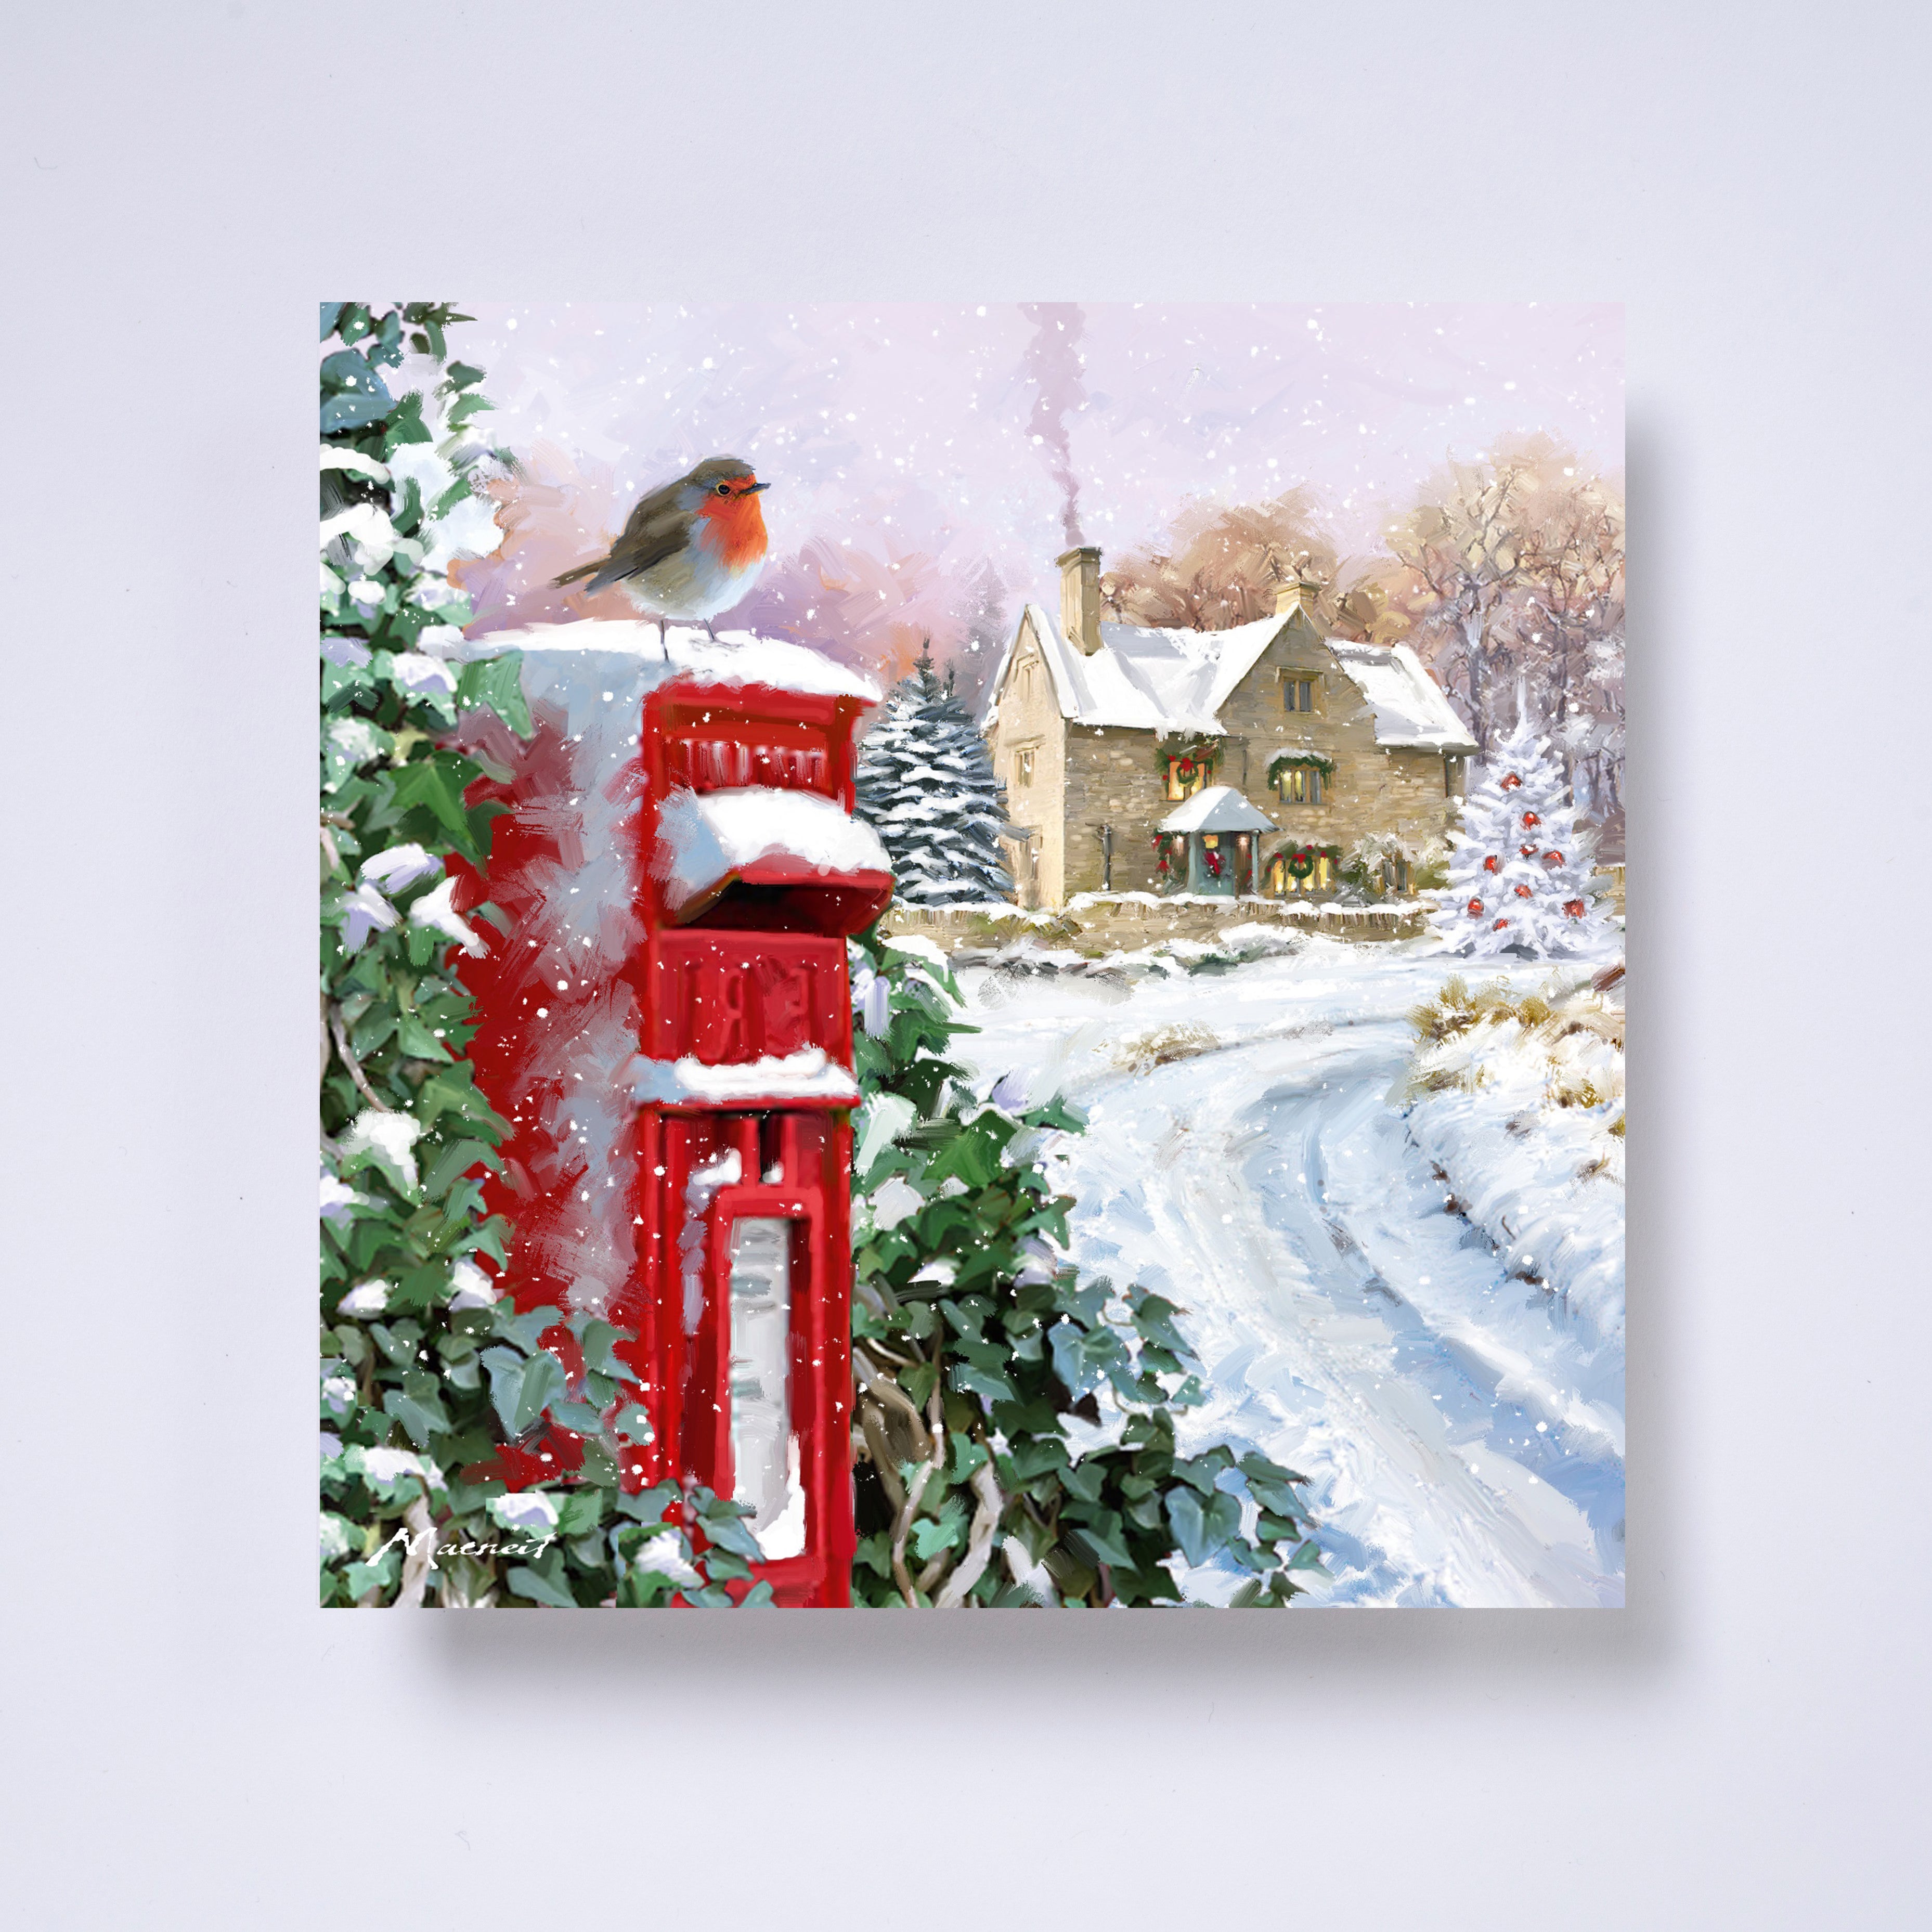 Village postbox - pack of 10 charity Christmas cards with envelopes